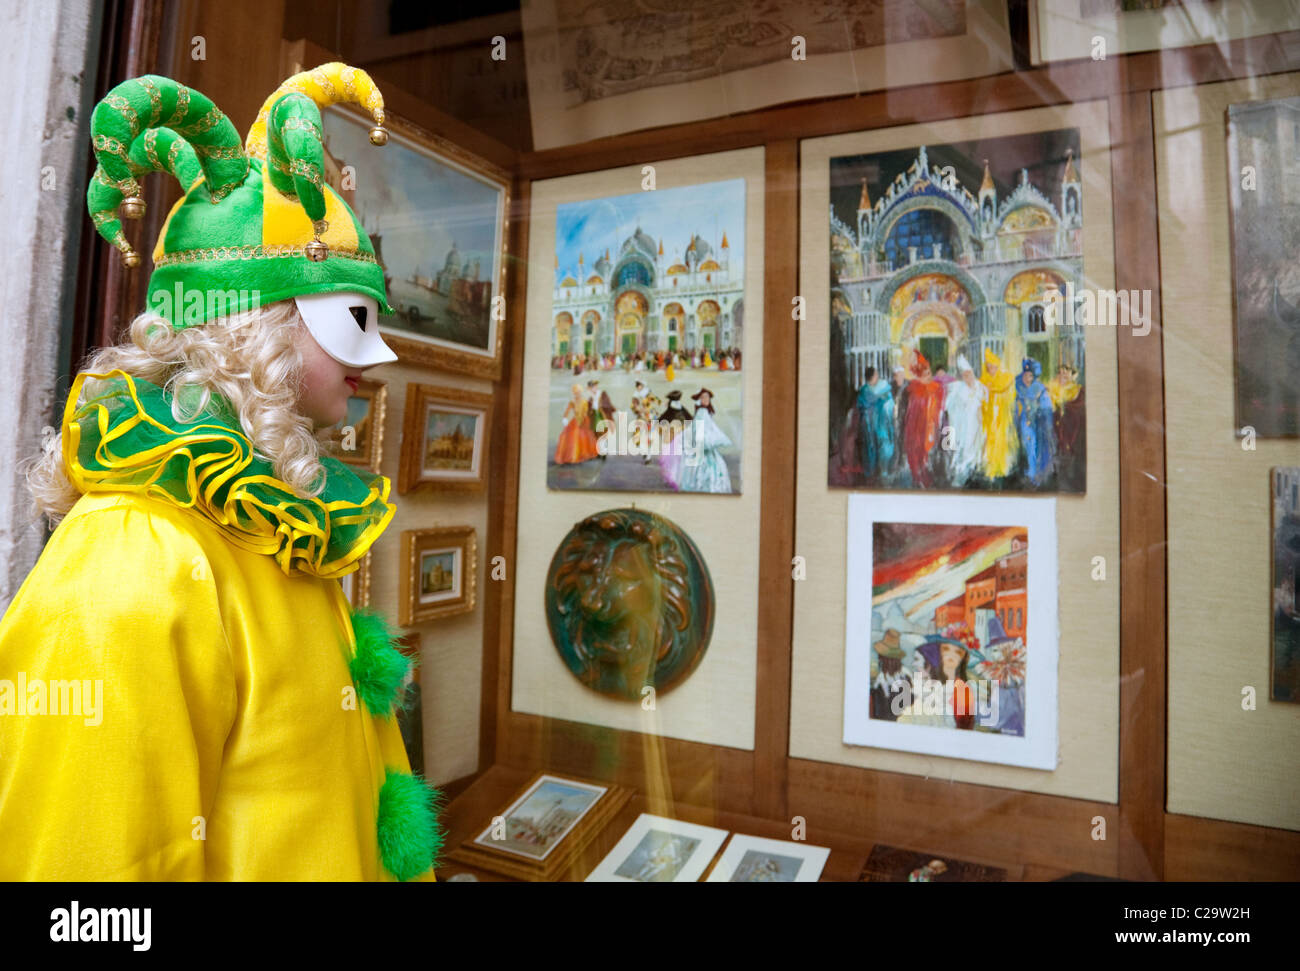 A girl in clown costume looks at paintings of Venice in a gallery window at the carnival, Venice, Italy Stock Photo